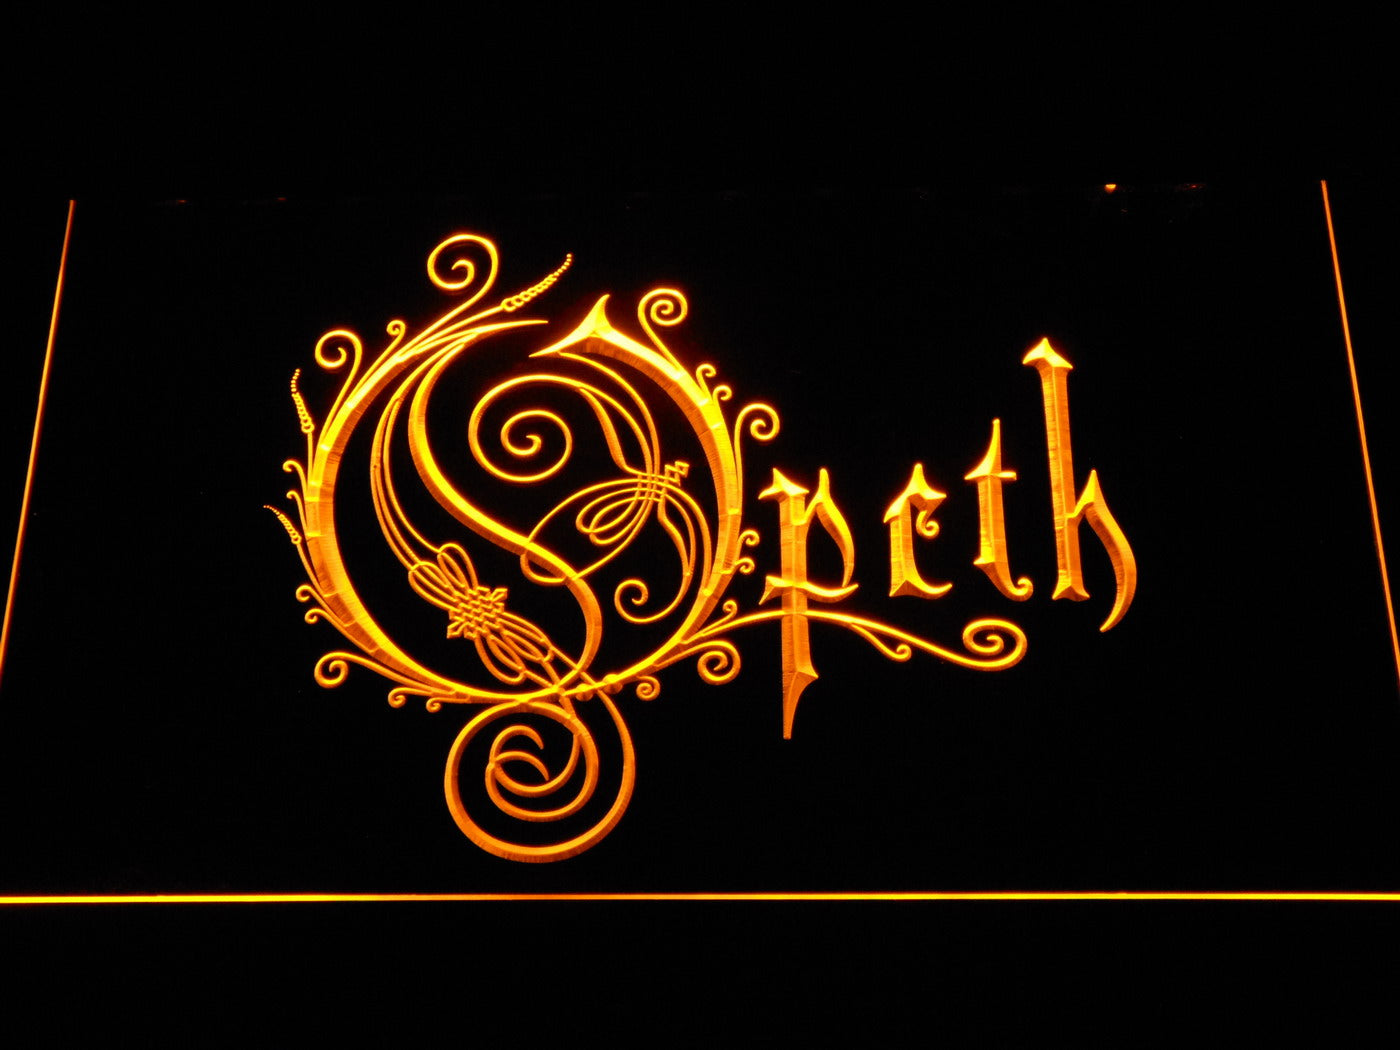 Opeth Heavy Metal Band LED Neon Sign